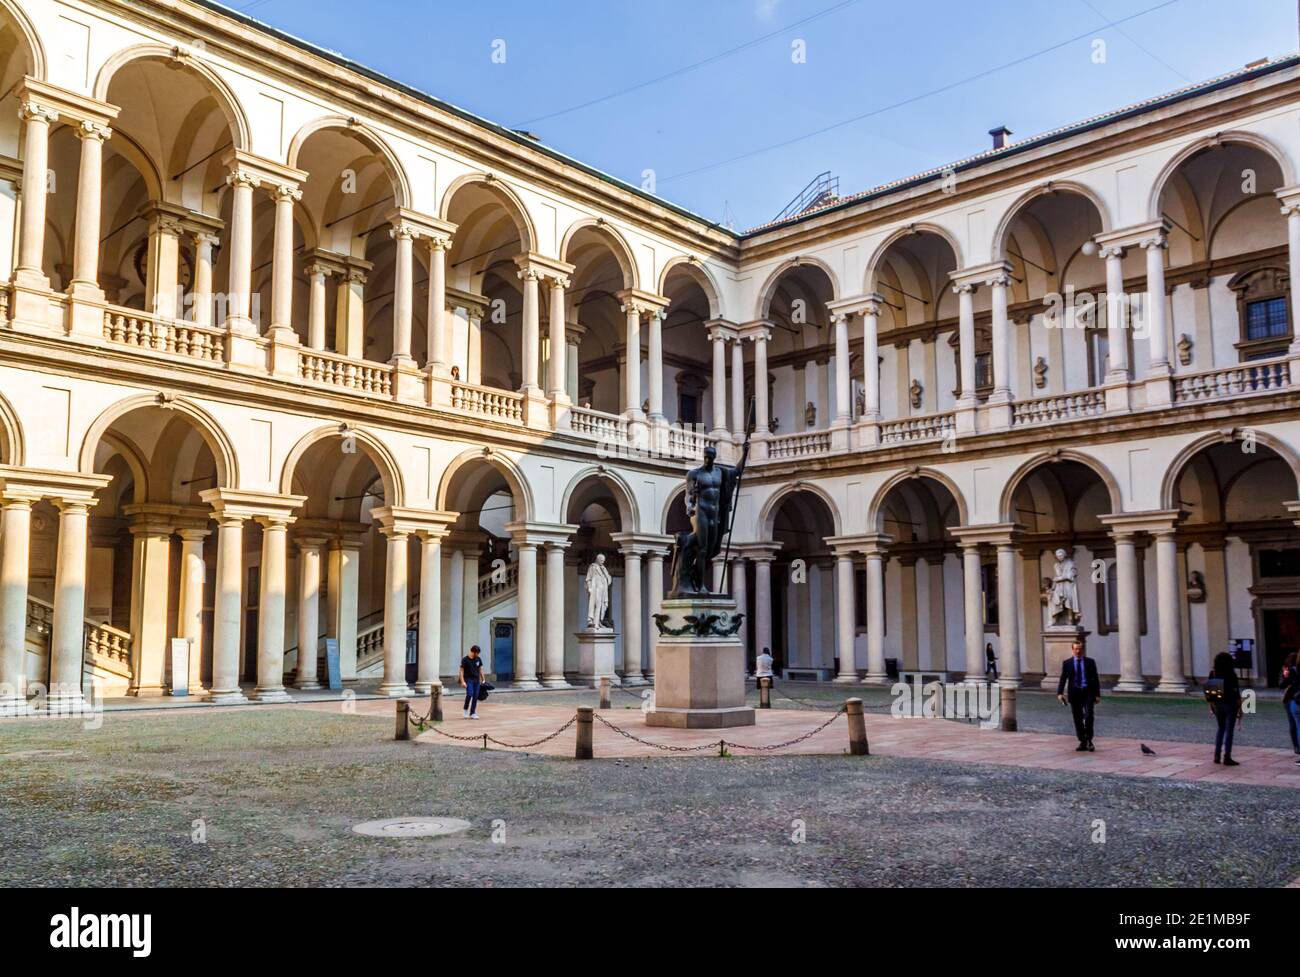 Milan, Lombardy, Italy - October 5 2017: The courtyard and entrance of the famous Brera University of Arts. Stock Photo